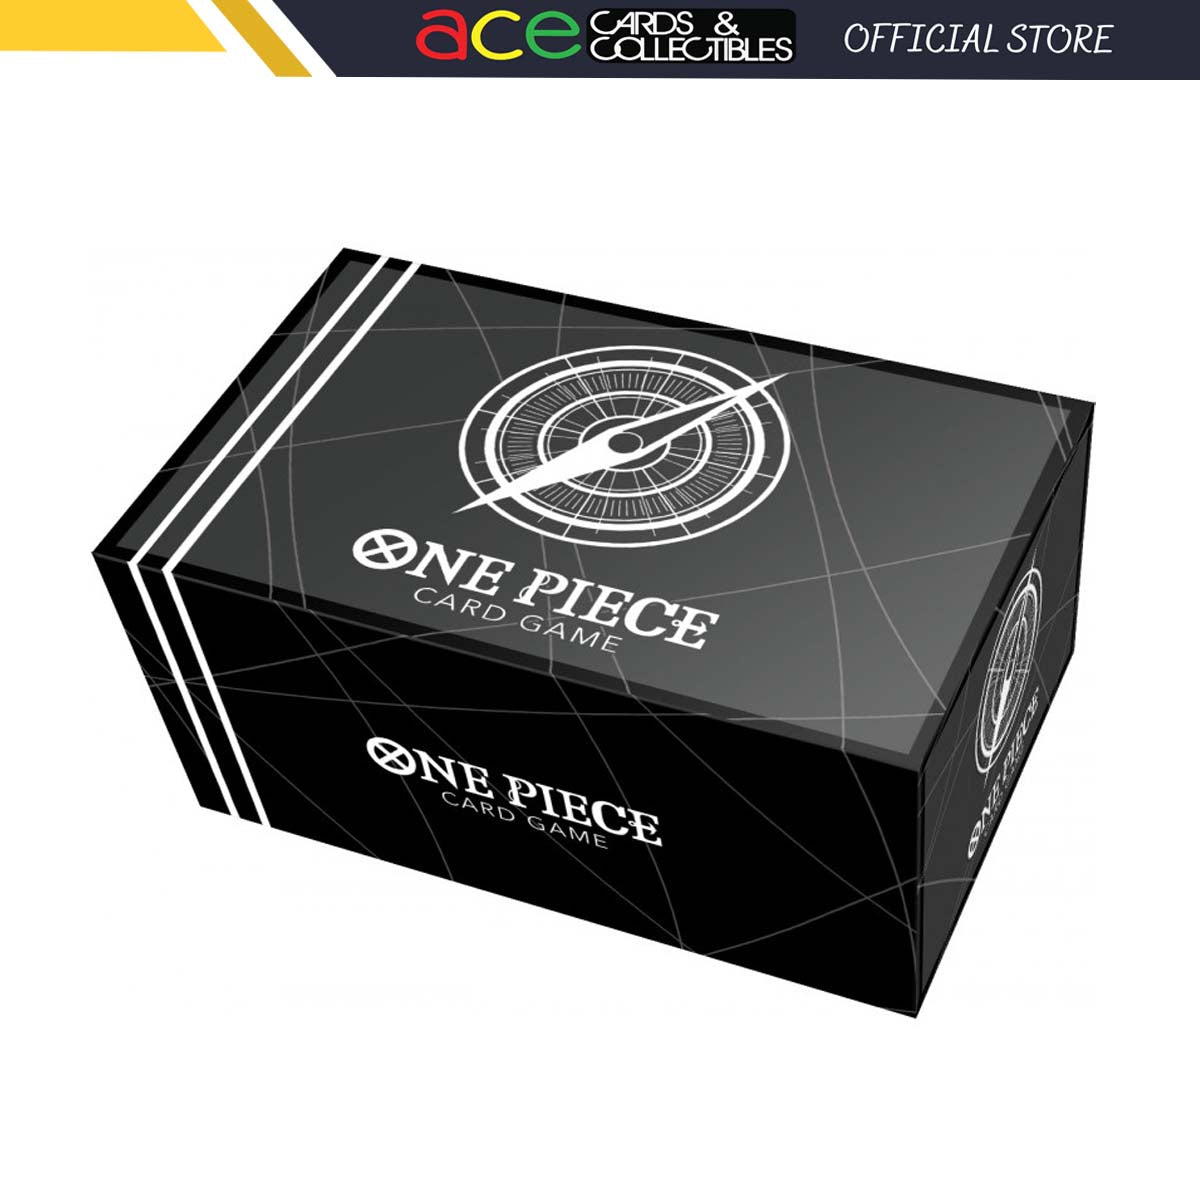 One Piece Card Game Storage Box "Standard Black"-Bandai-Ace Cards & Collectibles